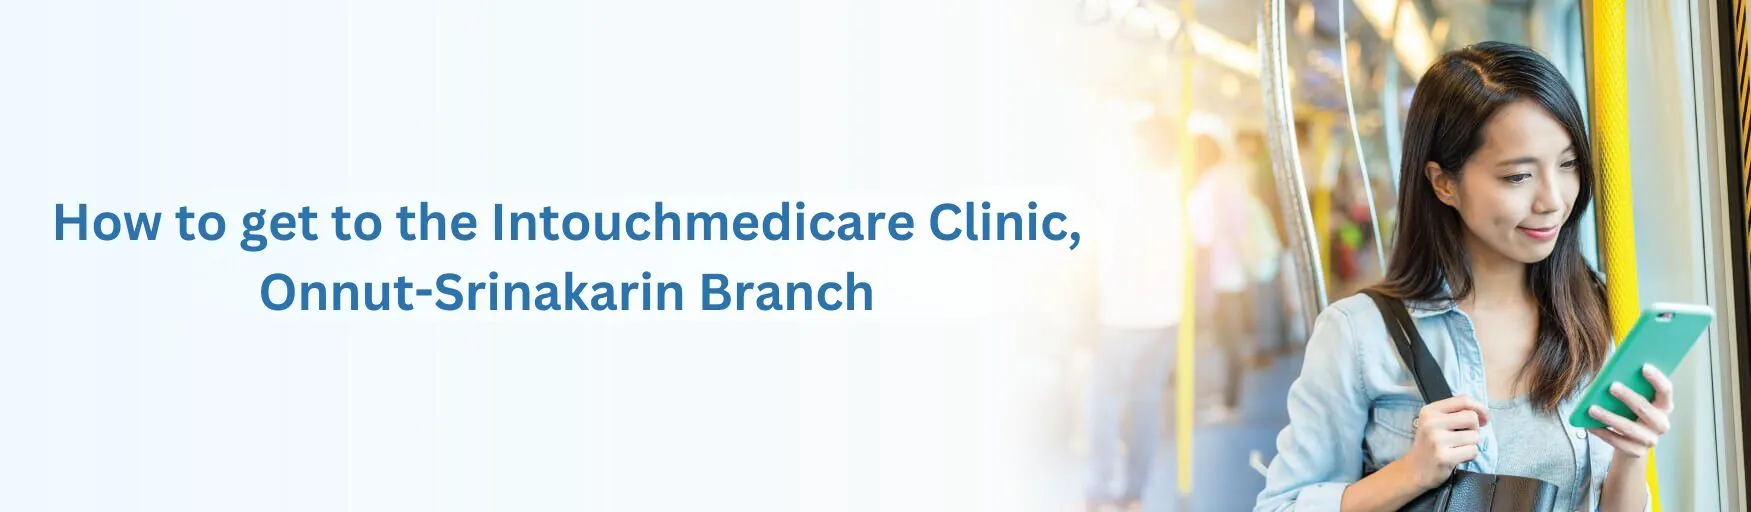 How to get to the Intouchmedicare Clinic, Onnut-Srinakarin branch 